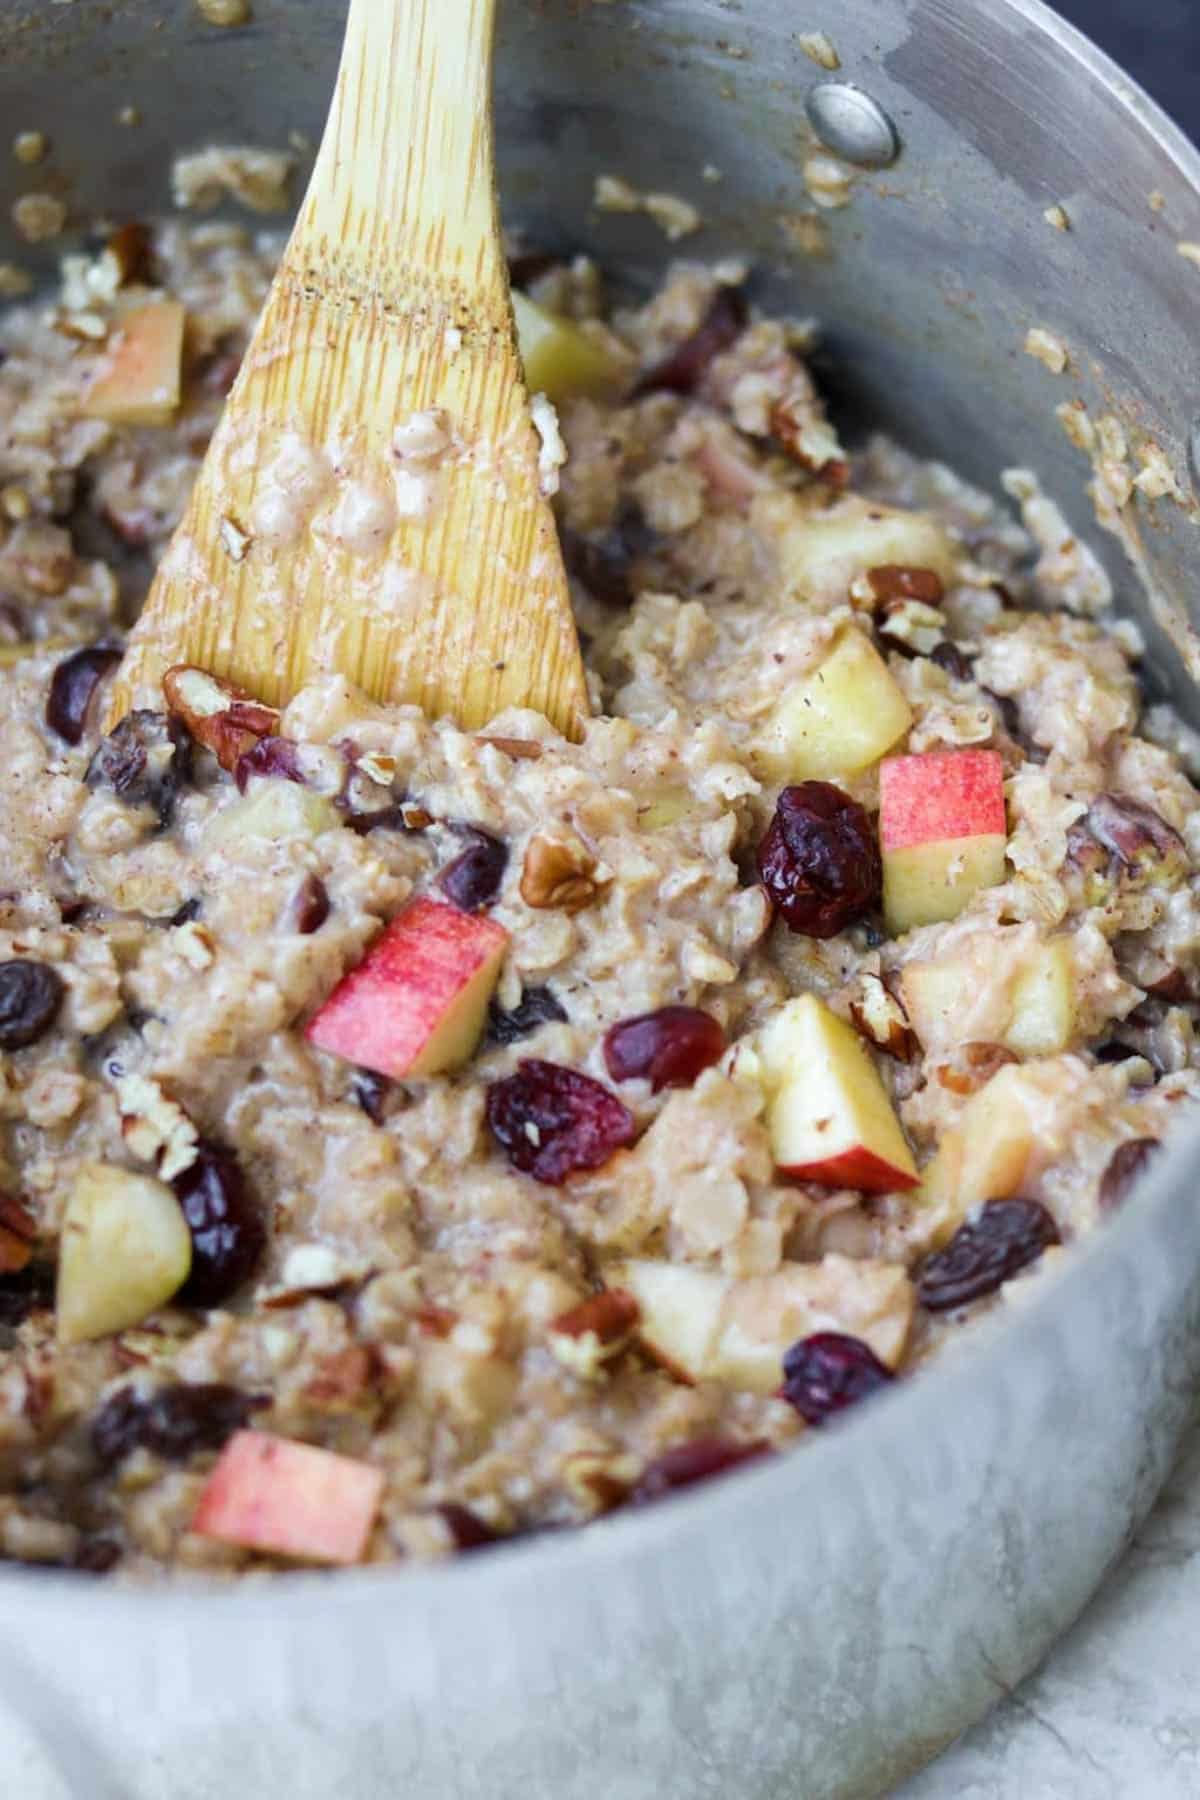 a pot full of cooked oatmeal with cranberries, apples and nuts